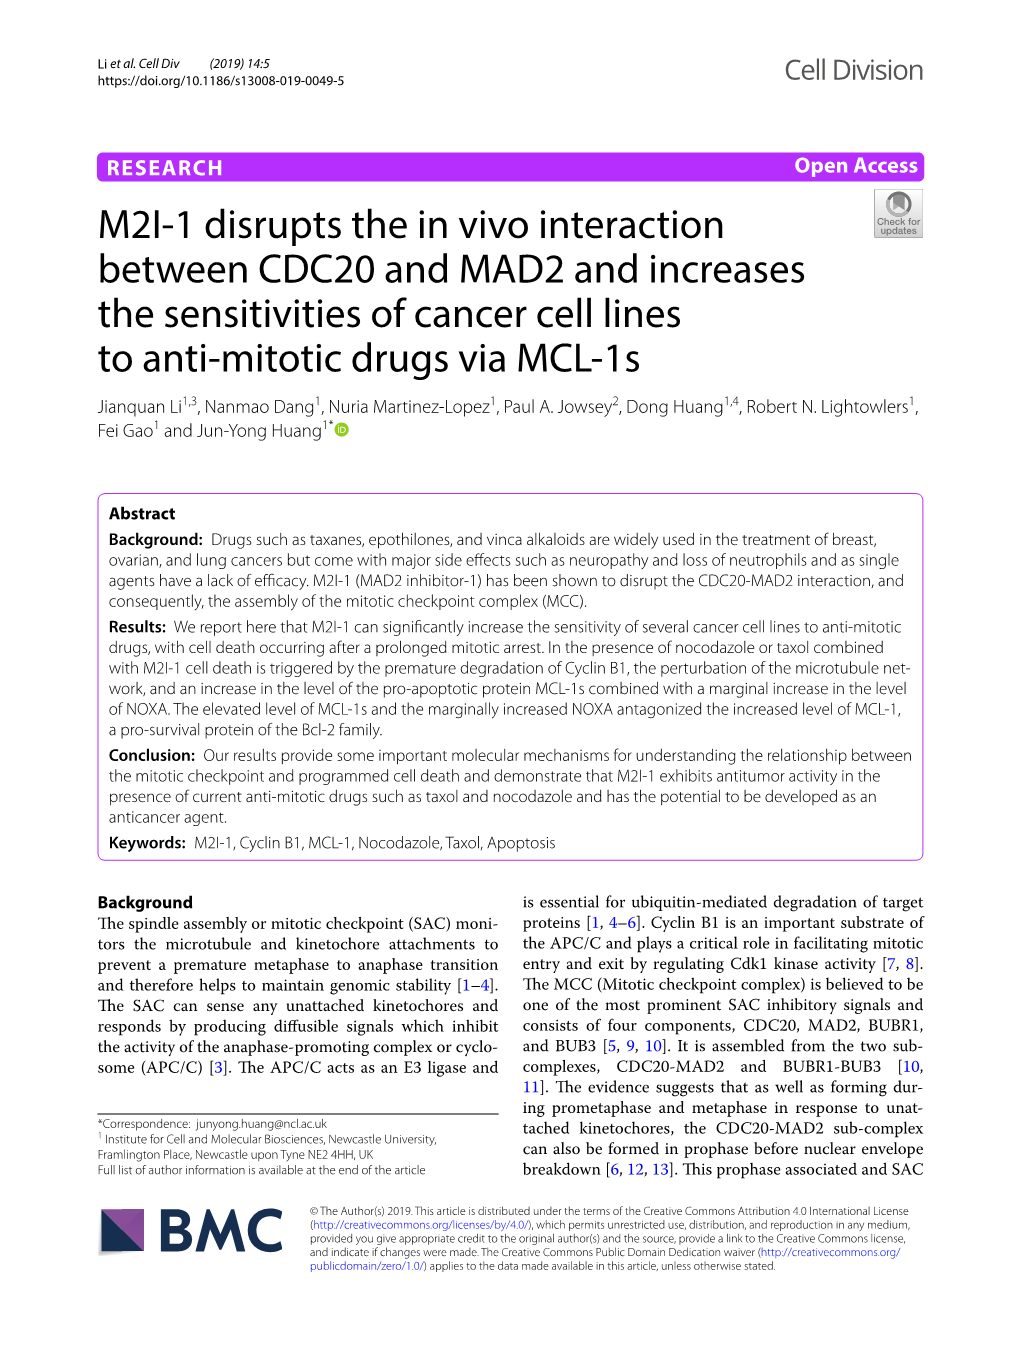 M2I-1 Disrupts the in Vivo Interaction Between CDC20 and MAD2 And